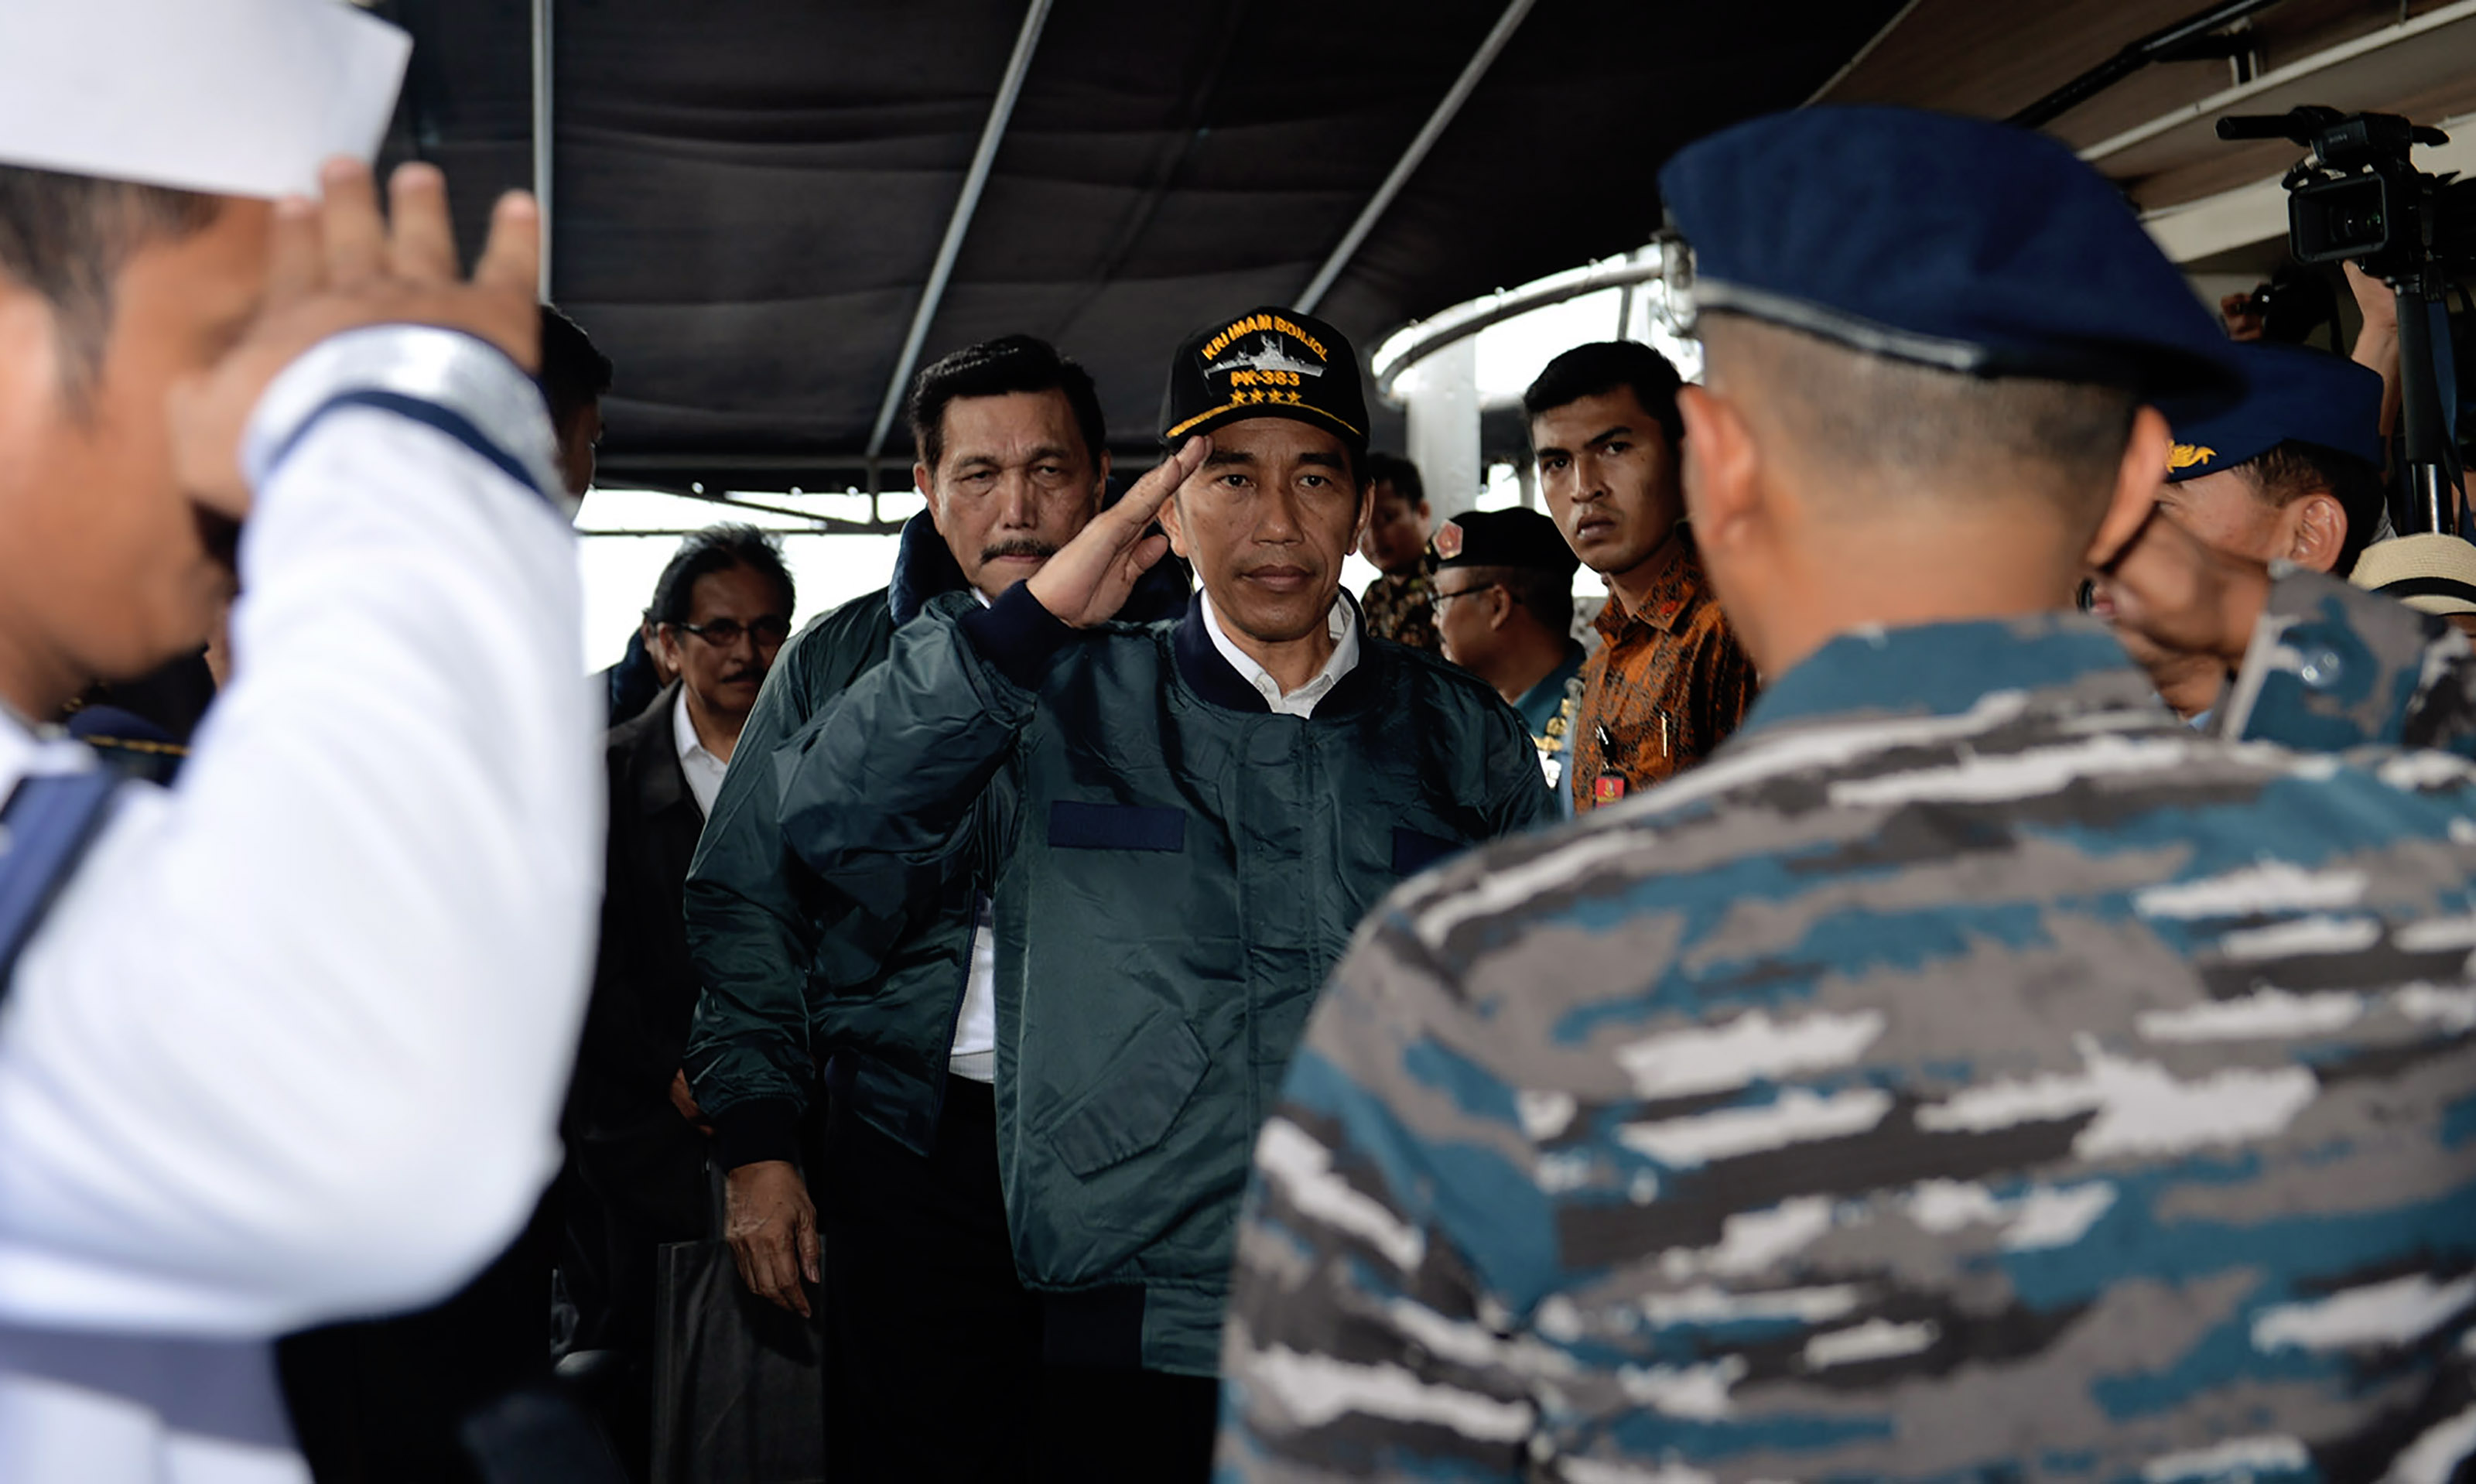 This handout photo taken and released by the Presidential Palace on June 23, 2016 shows Indonesian President Joko Widodo (C) saluting onboard the Imam Bonjol warship in Indonesia's Natuna Islands in the South China Sea. President Joko Widodo visited remote Indonesian islands on a warship on June 23 in an apparent show of force after clashes with Chinese vessels and as fears grow Beijing is seeking to stake a claim in the area. / AFP PHOTO / PRESIDENTIAL PALACE / STR / --- EDITORS NOTE --- RESTRICTED TO EDITORIAL USE - MANDATORY CREDIT "AFP PHOTO /  PRESIDENTIAL PALACE" - NO MARKETING NO ADVERTISING CAMPAIGNS - DISTRIBUTED AS A SERVICE TO CLIENTS - NO ARCHIVES